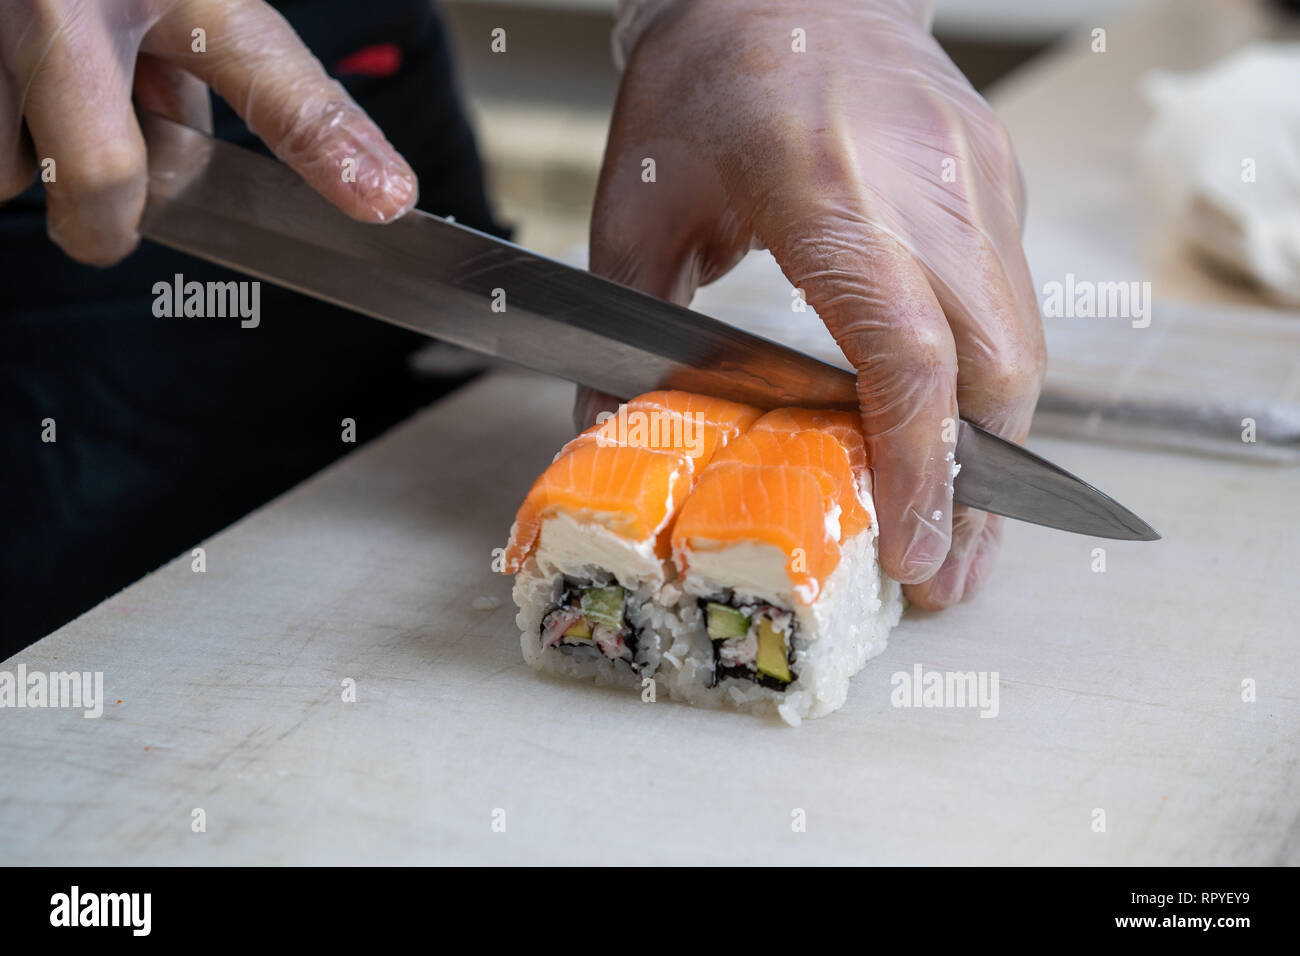 https://c8.alamy.com/comp/RPYEY9/cook-hands-making-japanese-sushi-roll-japanese-chef-at-work-preparing-delicious-sushi-roll-with-eel-and-avocado-appetizing-japanese-food-RPYEY9.jpg